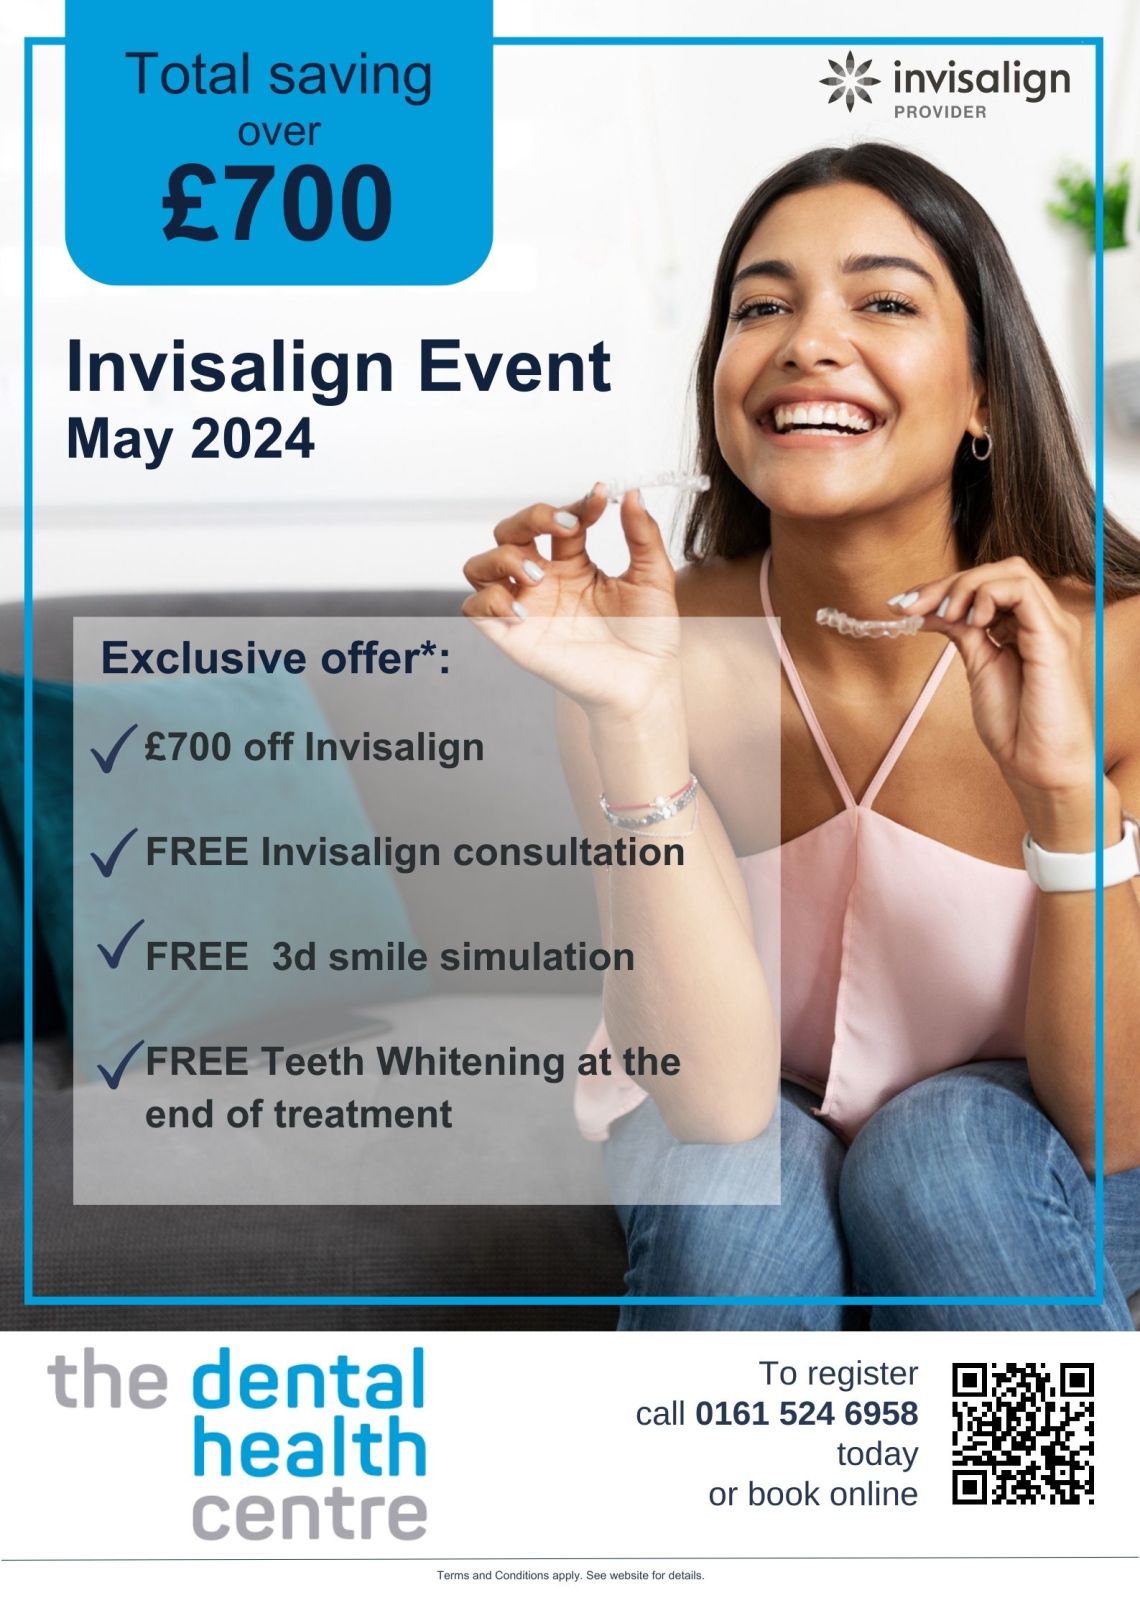 Invisalign promotion: Start your journey today